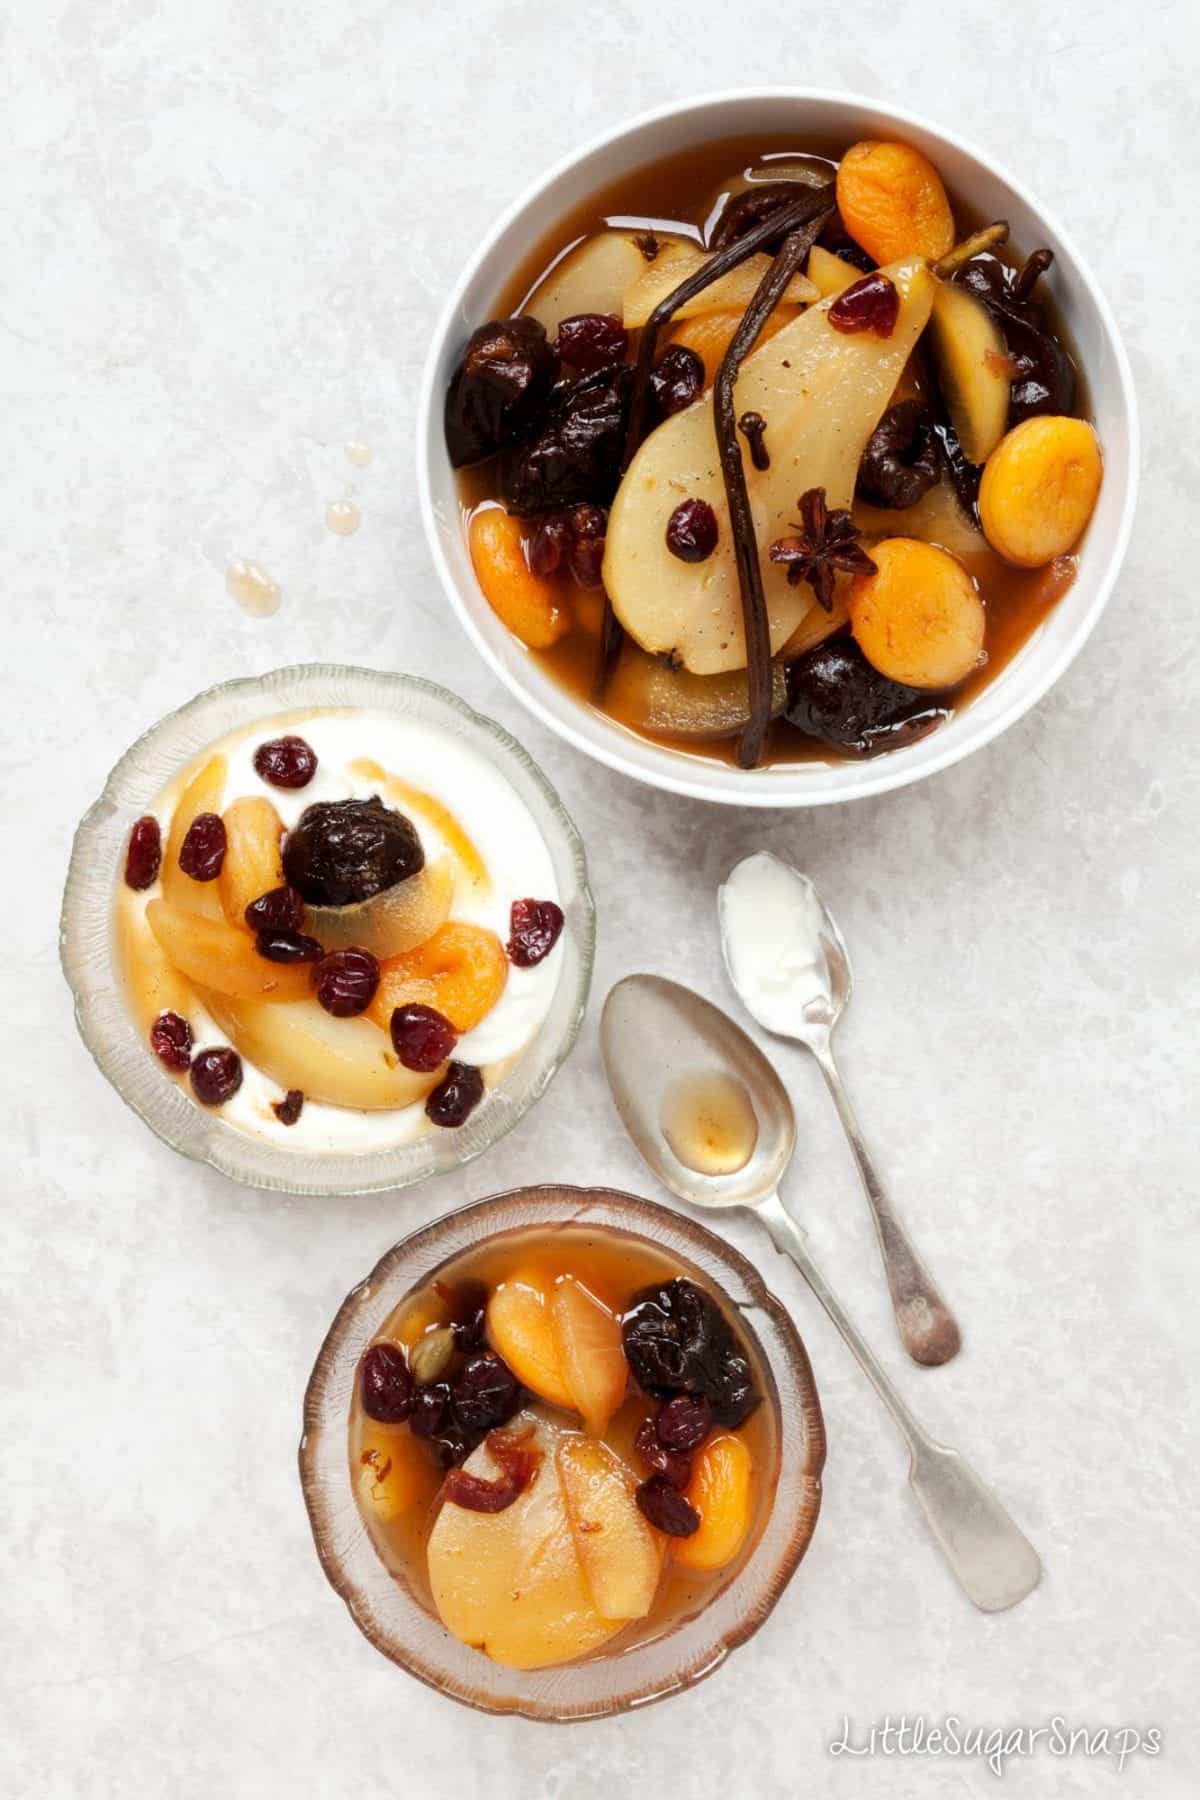 Bowls of Spiced Fruit Compote with yoghurt.